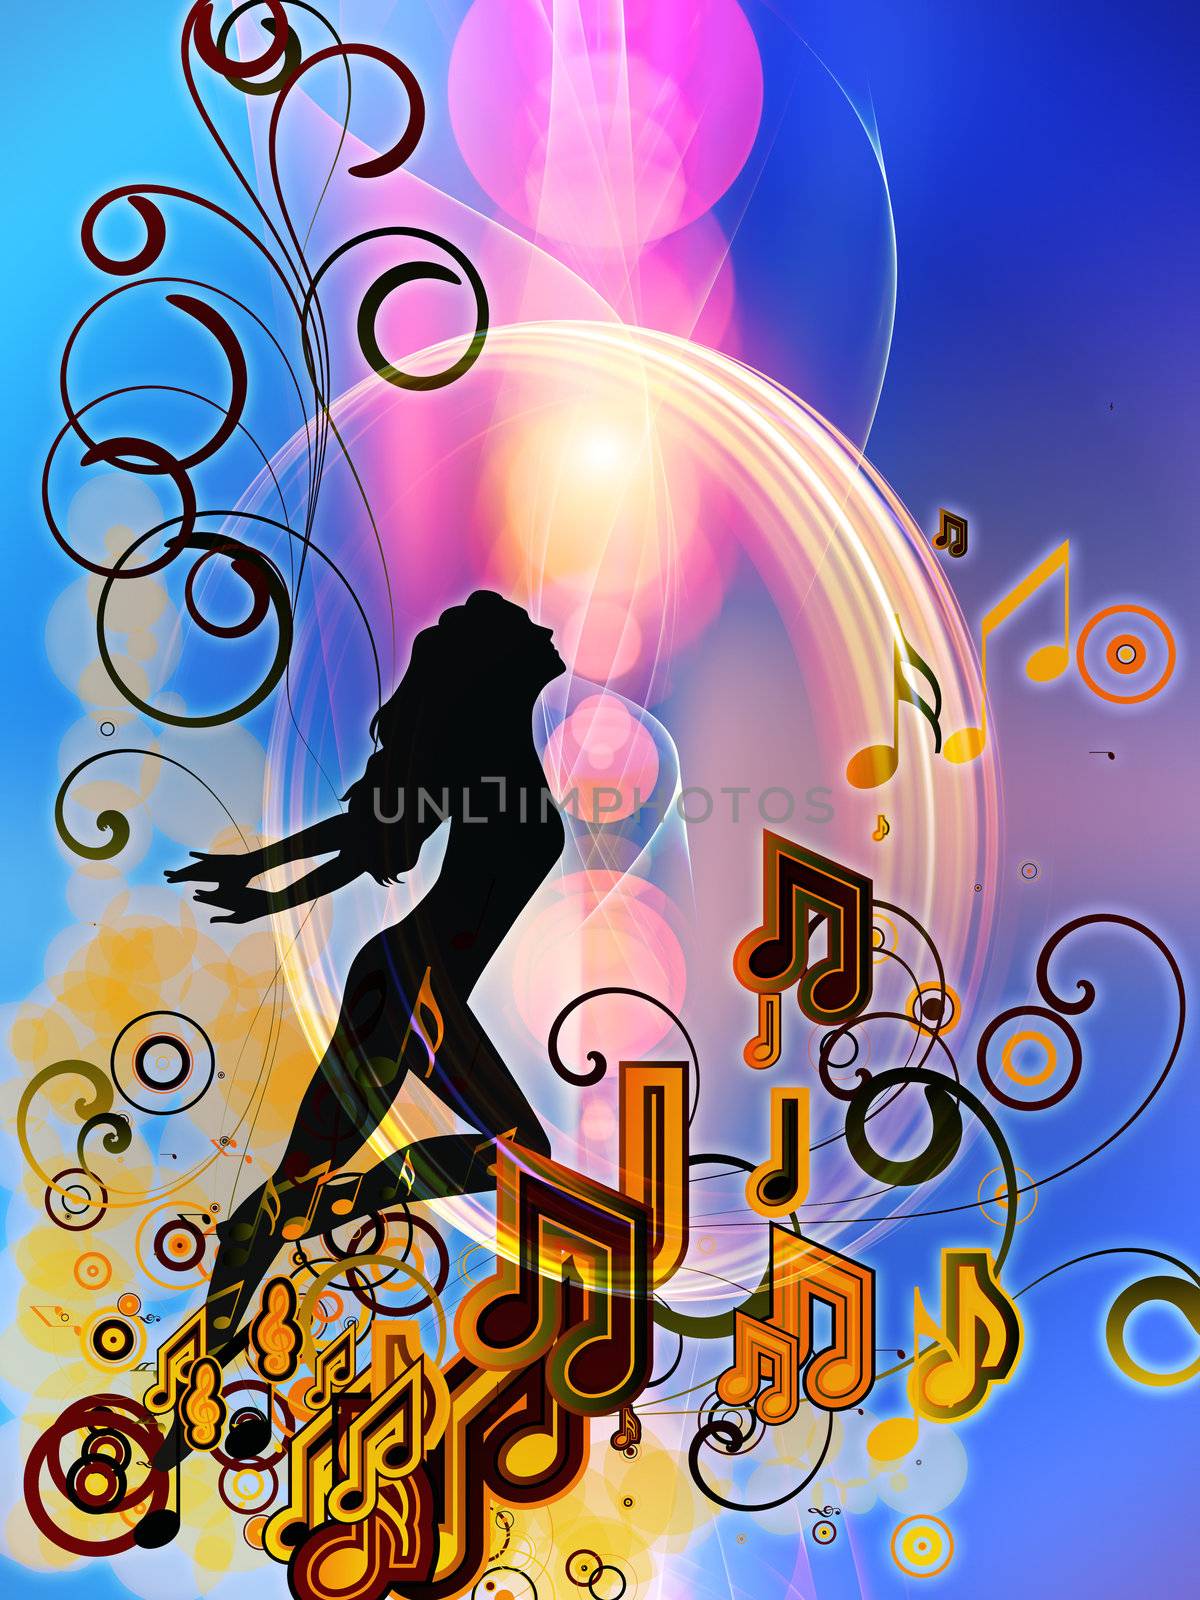 Design composed of girl silhouette, notes, lights and abstract design elements as a metaphor on the subject of music, song, performance and dance